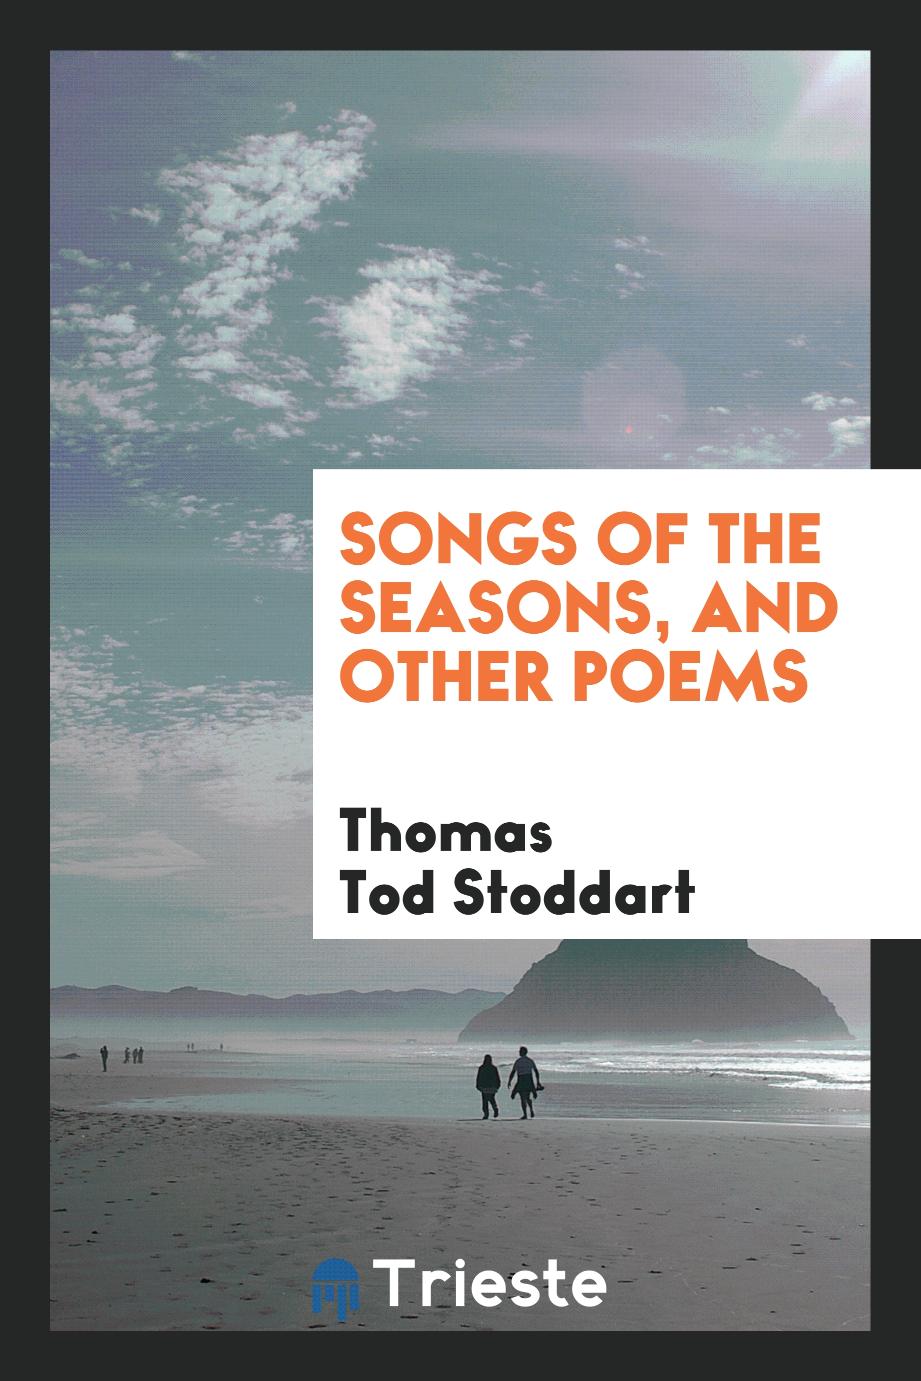 Thomas Tod Stoddart - Songs of the seasons, and other poems